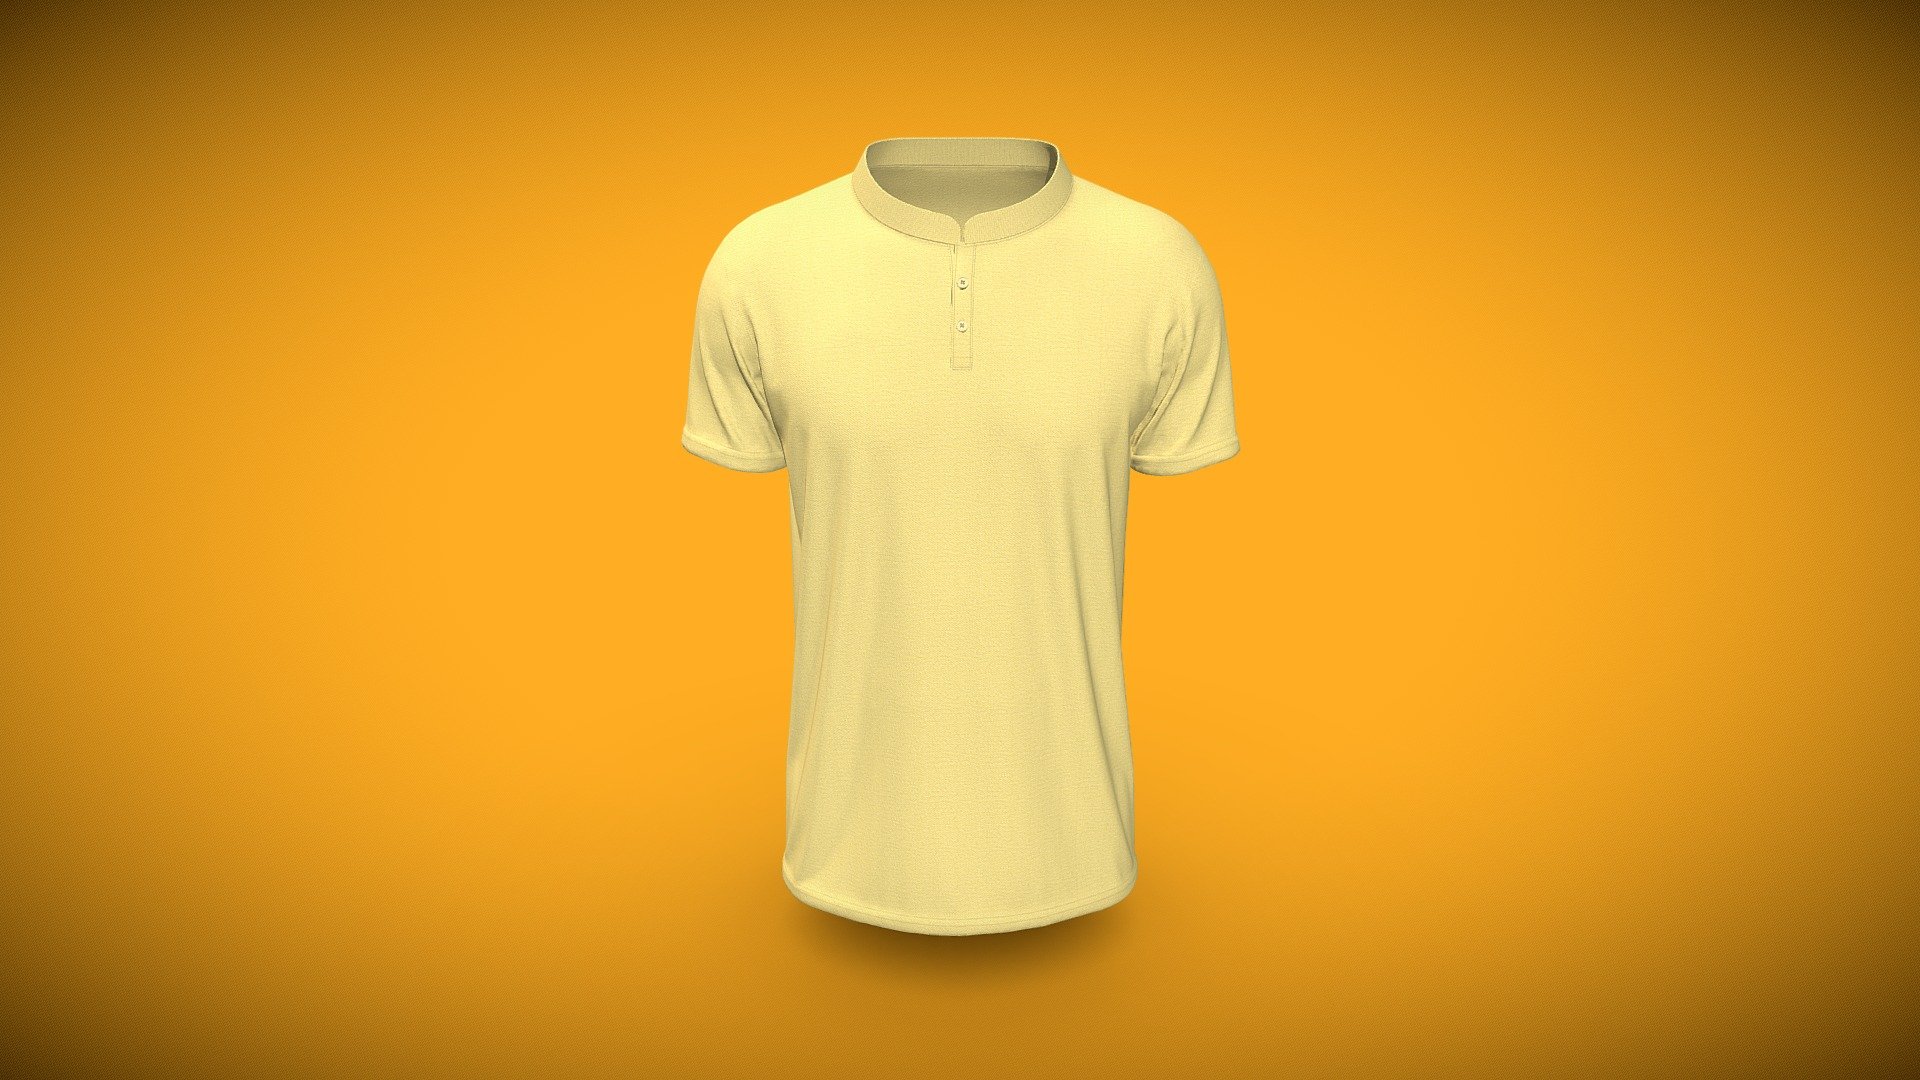 Cloth Title = Band Collar Men's Polo T-shirt 

SKU = DG100135 

Category = Men 

Product Type = Tee 

Cloth Length = Regular 

Body Fit = Regular Fit 

Occasion = Casual 

Sleeve Style = Set In Sleeve 


Our Services:

3D Apparel Design.

OBJ,FBX,GLTF Making with High/Low Poly.

Fabric Digitalization.

Mockup making.

3D Teck Pack.

Pattern Making.

2D Illustration.

Cloth Animation and 360 Spin Video.


Contact us:- 

Email: info@digitalfashionwear.com 

Website: https://digitalfashionwear.com 


We designed all the types of cloth specially focused on product visualization, e-commerce, fitting, and production. 

We will design: 

T-shirts 

Polo shirts 

Hoodies 

Sweatshirt 

Jackets 

Shirts 

TankTops 

Trousers 

Bras 

Underwear 

Blazer 

Aprons 

Leggings 

and All Fashion items. 





Our goal is to make sure what we provide you, meets your demand 3d model